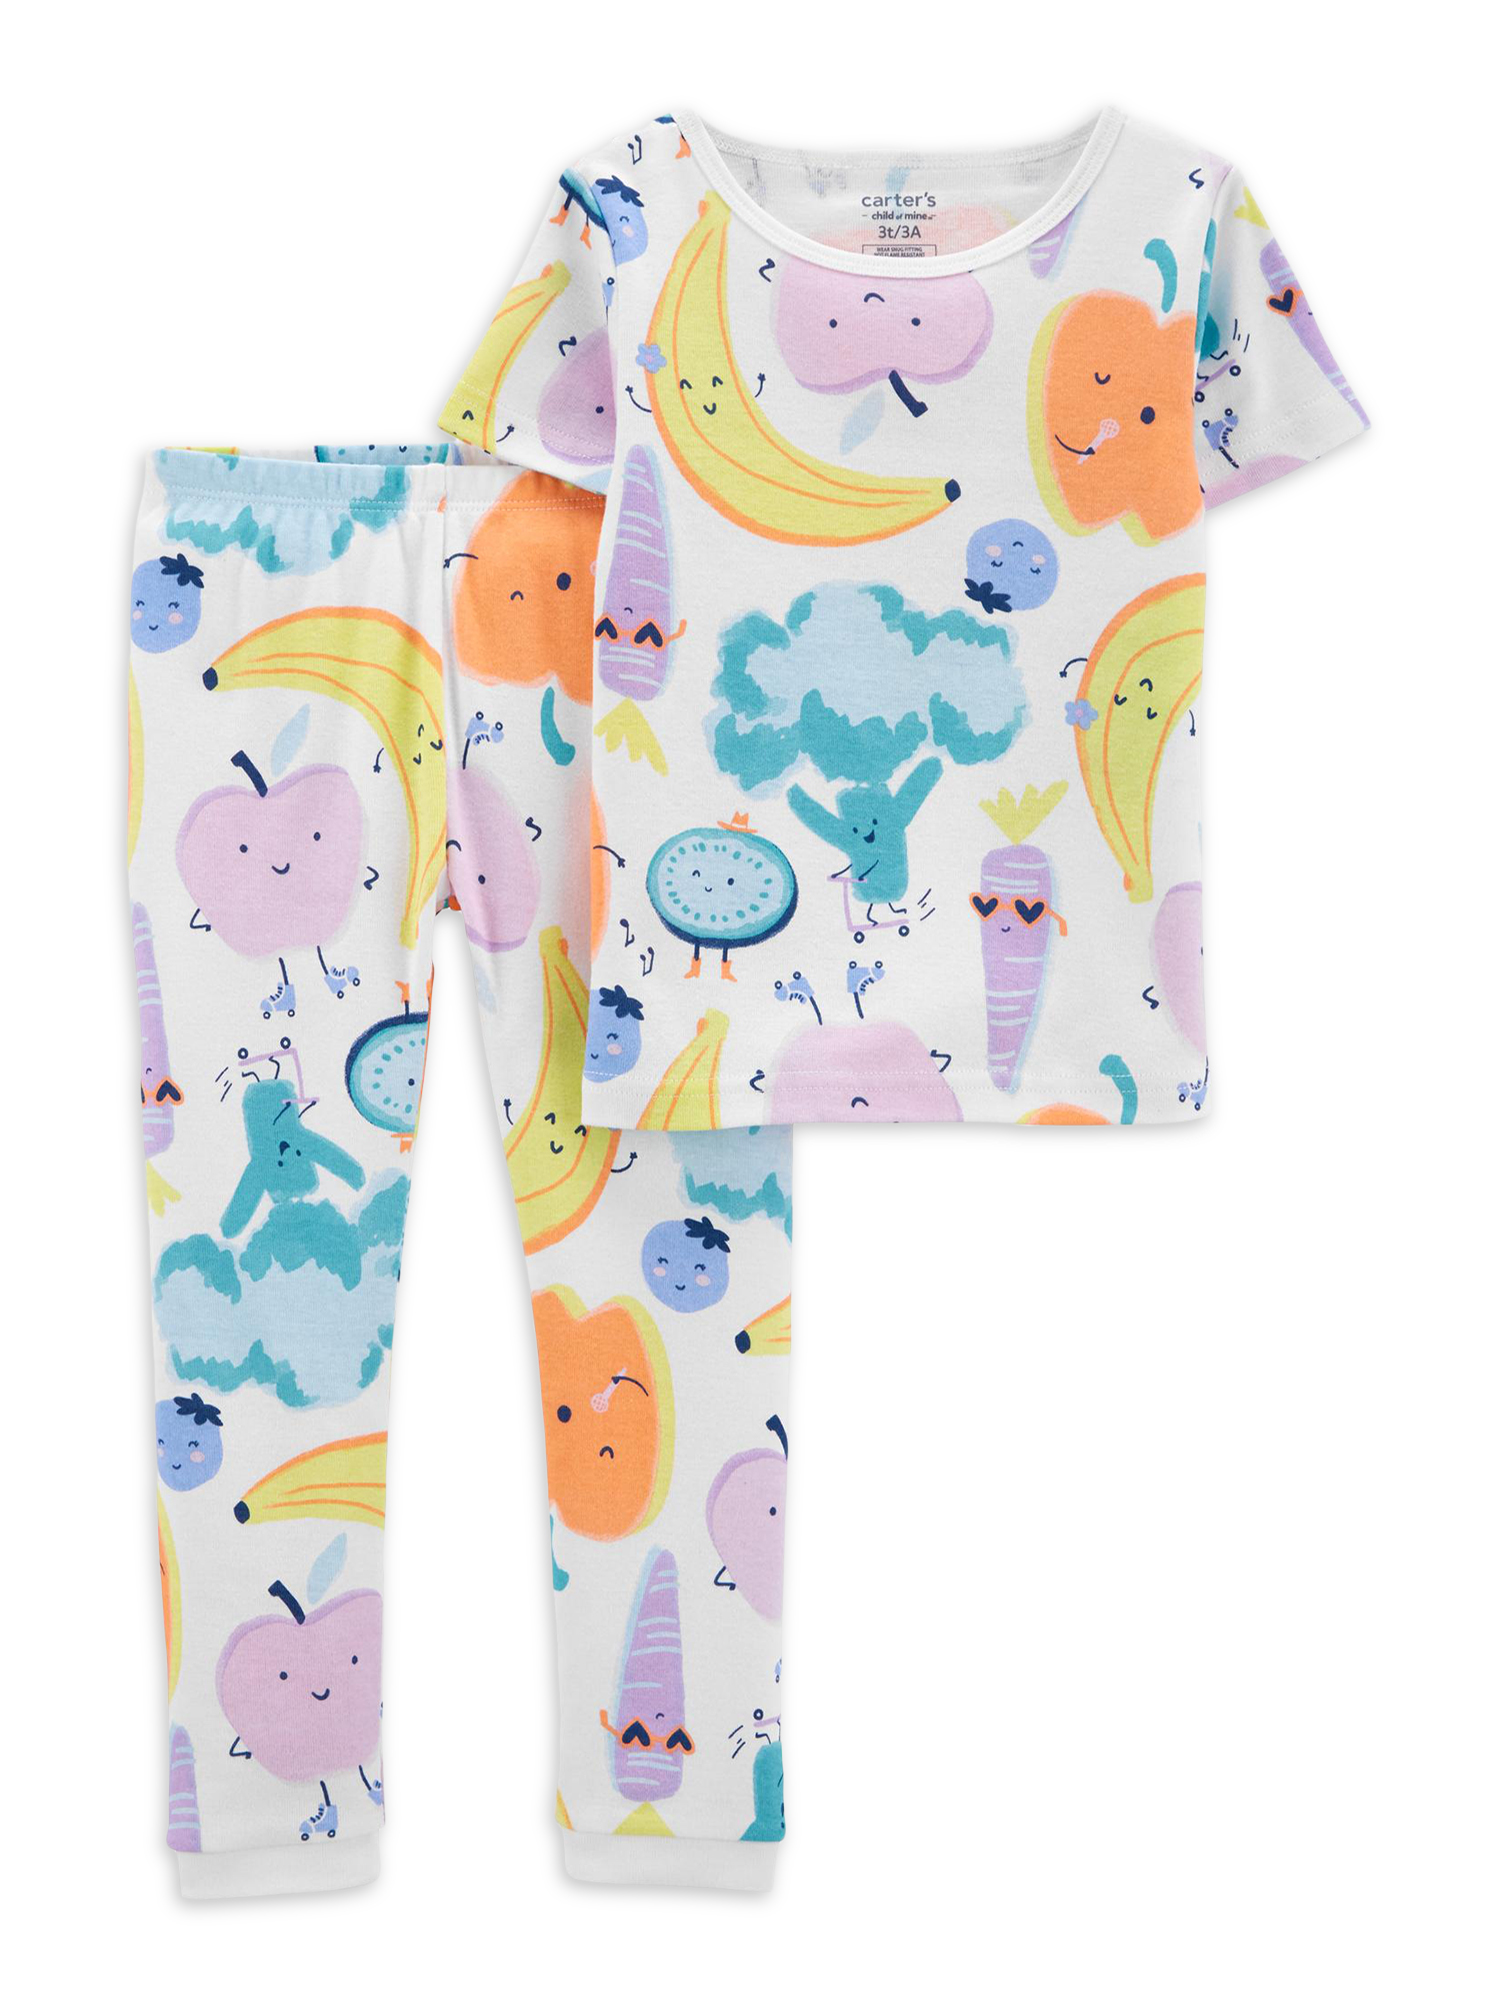 Carter's Child of Mine Toddler Girl Cotton Top and Pants Pajama Set, 2-Piece, Sizes 12M-5T